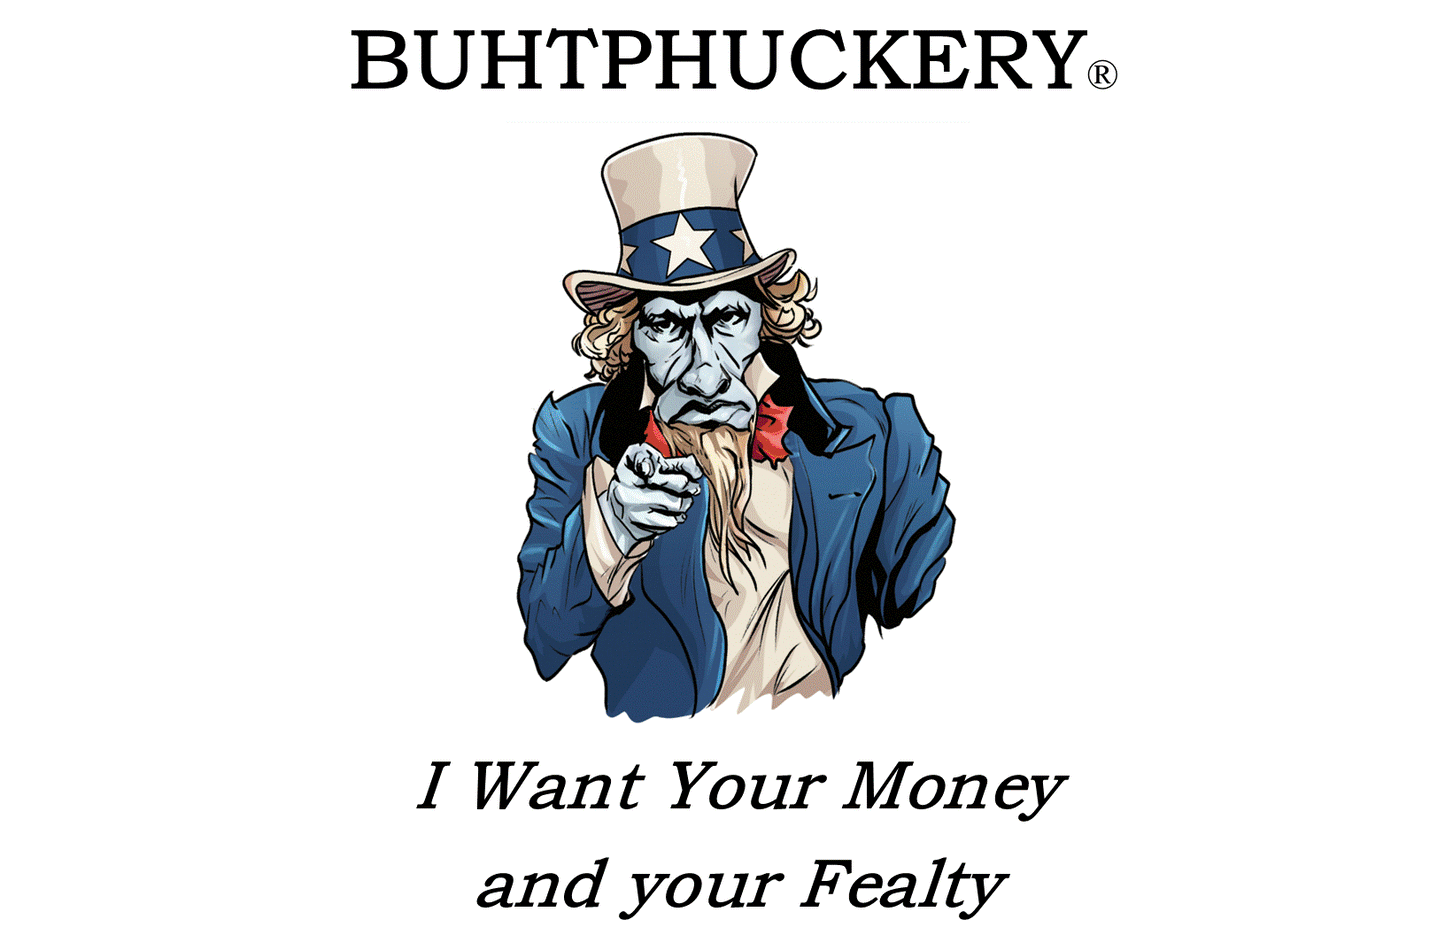 UNCLE SCAM: Funny Political Small Graphic T-Shirt - BUHTPHUCKERY